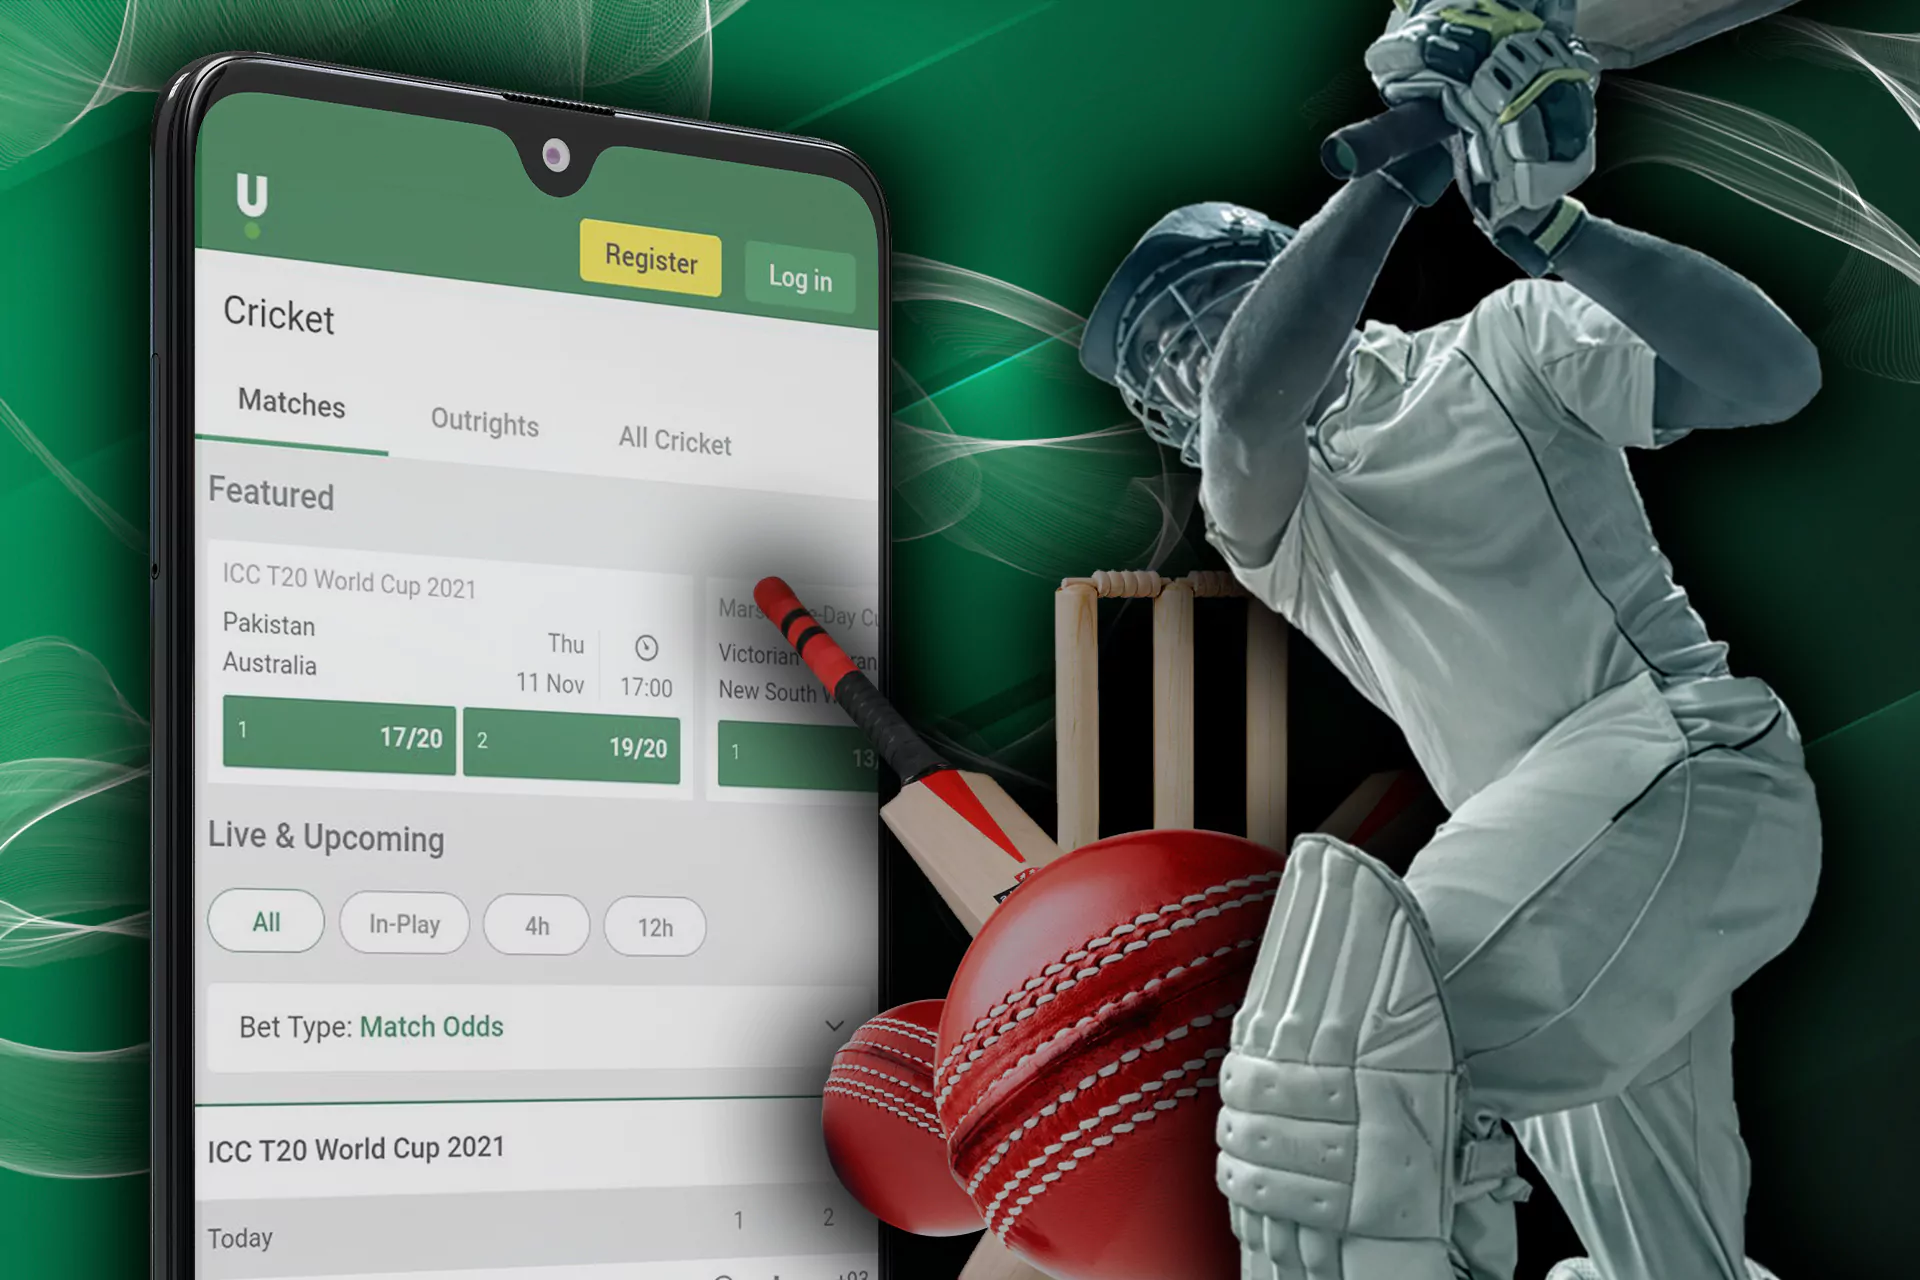 Log in to your account. top it up and place a bet on cricket.